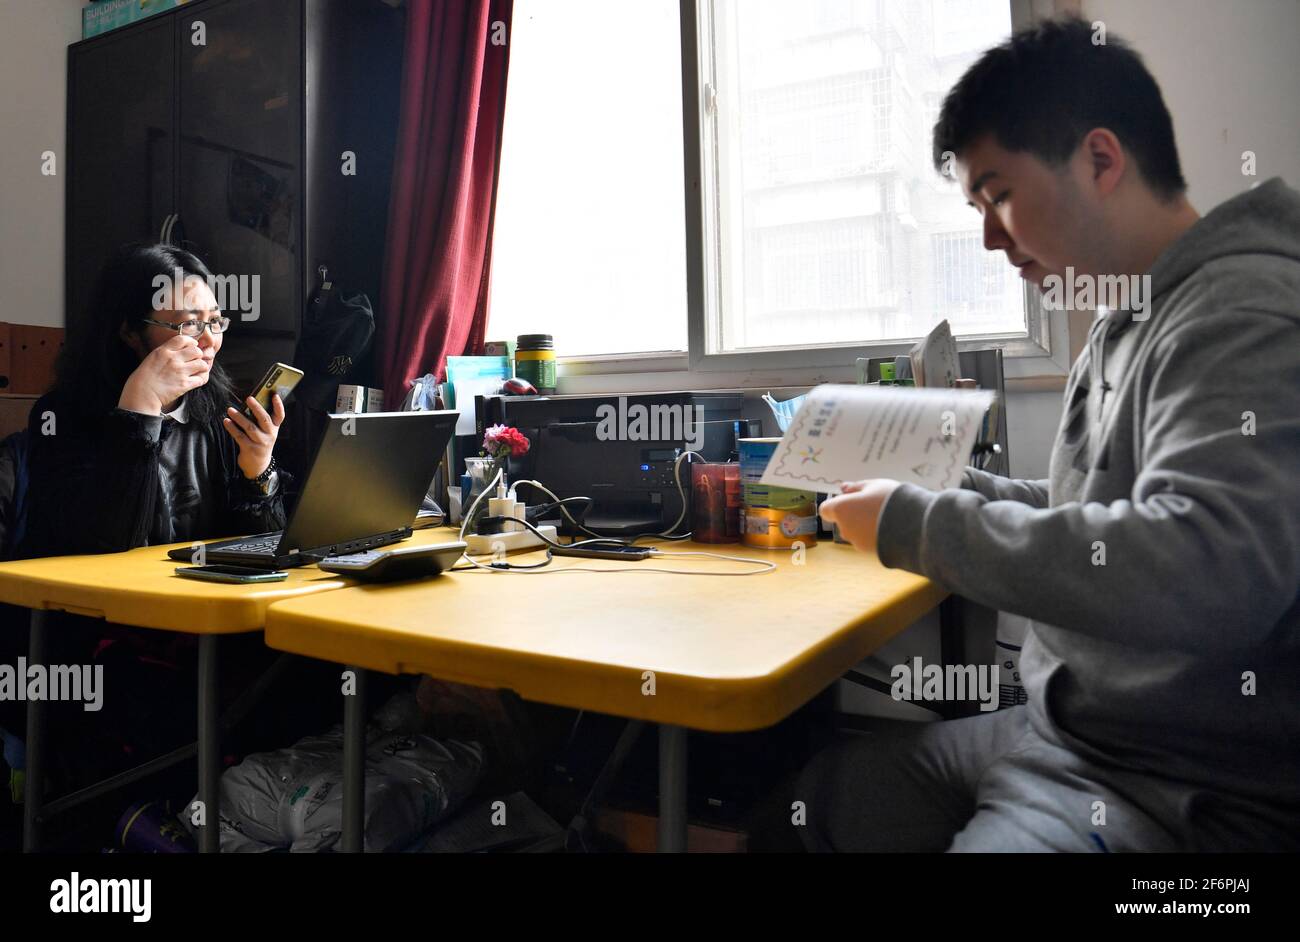 (210402) -- TIANJIN, April 2, 2021 (Xinhua) -- Wu Guixiang (L) and her son Zhang Hao are seen at the autism training center she set up in Hedong District, north China's Tianjin, March 30, 2021.  In 1998, Zhang Hao was diagnosed with autism at the age of two. Ever since the diagnosis, Zhang's mother Wu Guixiang has spent all her time looking after her son.    In order to help Zhang Hao and eight others with autism improve their social engagement after they had become grown-ups, Wu set up an autism training center in 2016, providing them with courses on life, social and vocational skills.   With Stock Photo